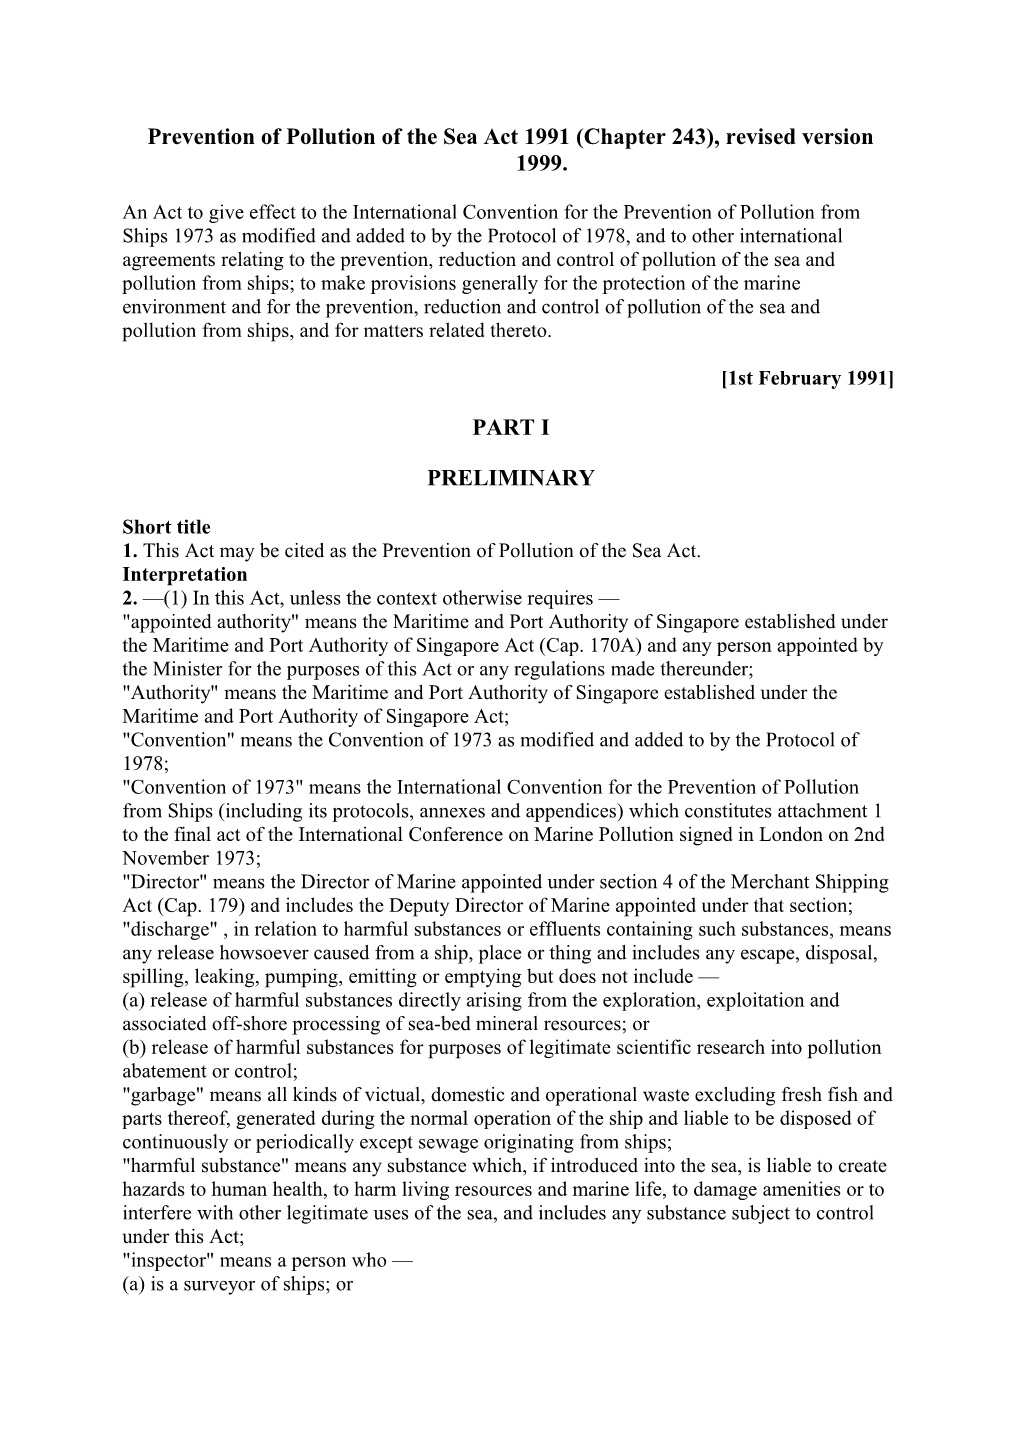 Prevention of Pollution of the Sea Act 1991 (Chapter 243), Revised Version 1999